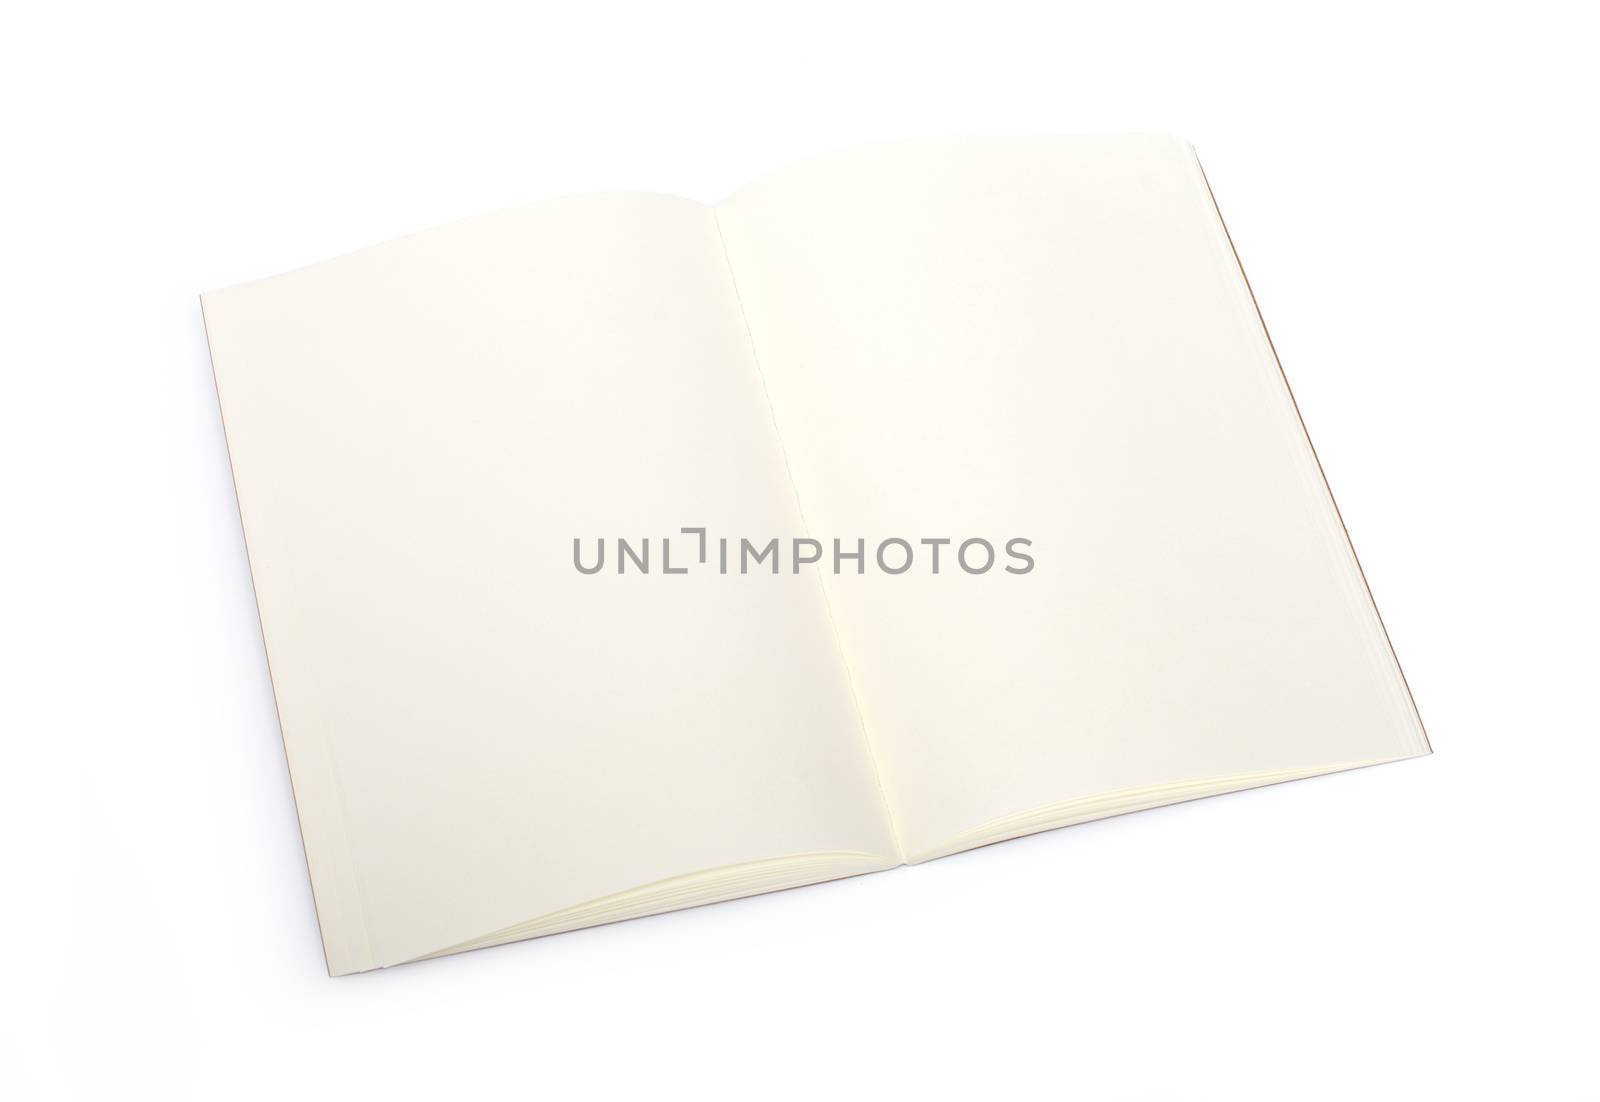 Opened blank book with clipping path by DNKSTUDIO